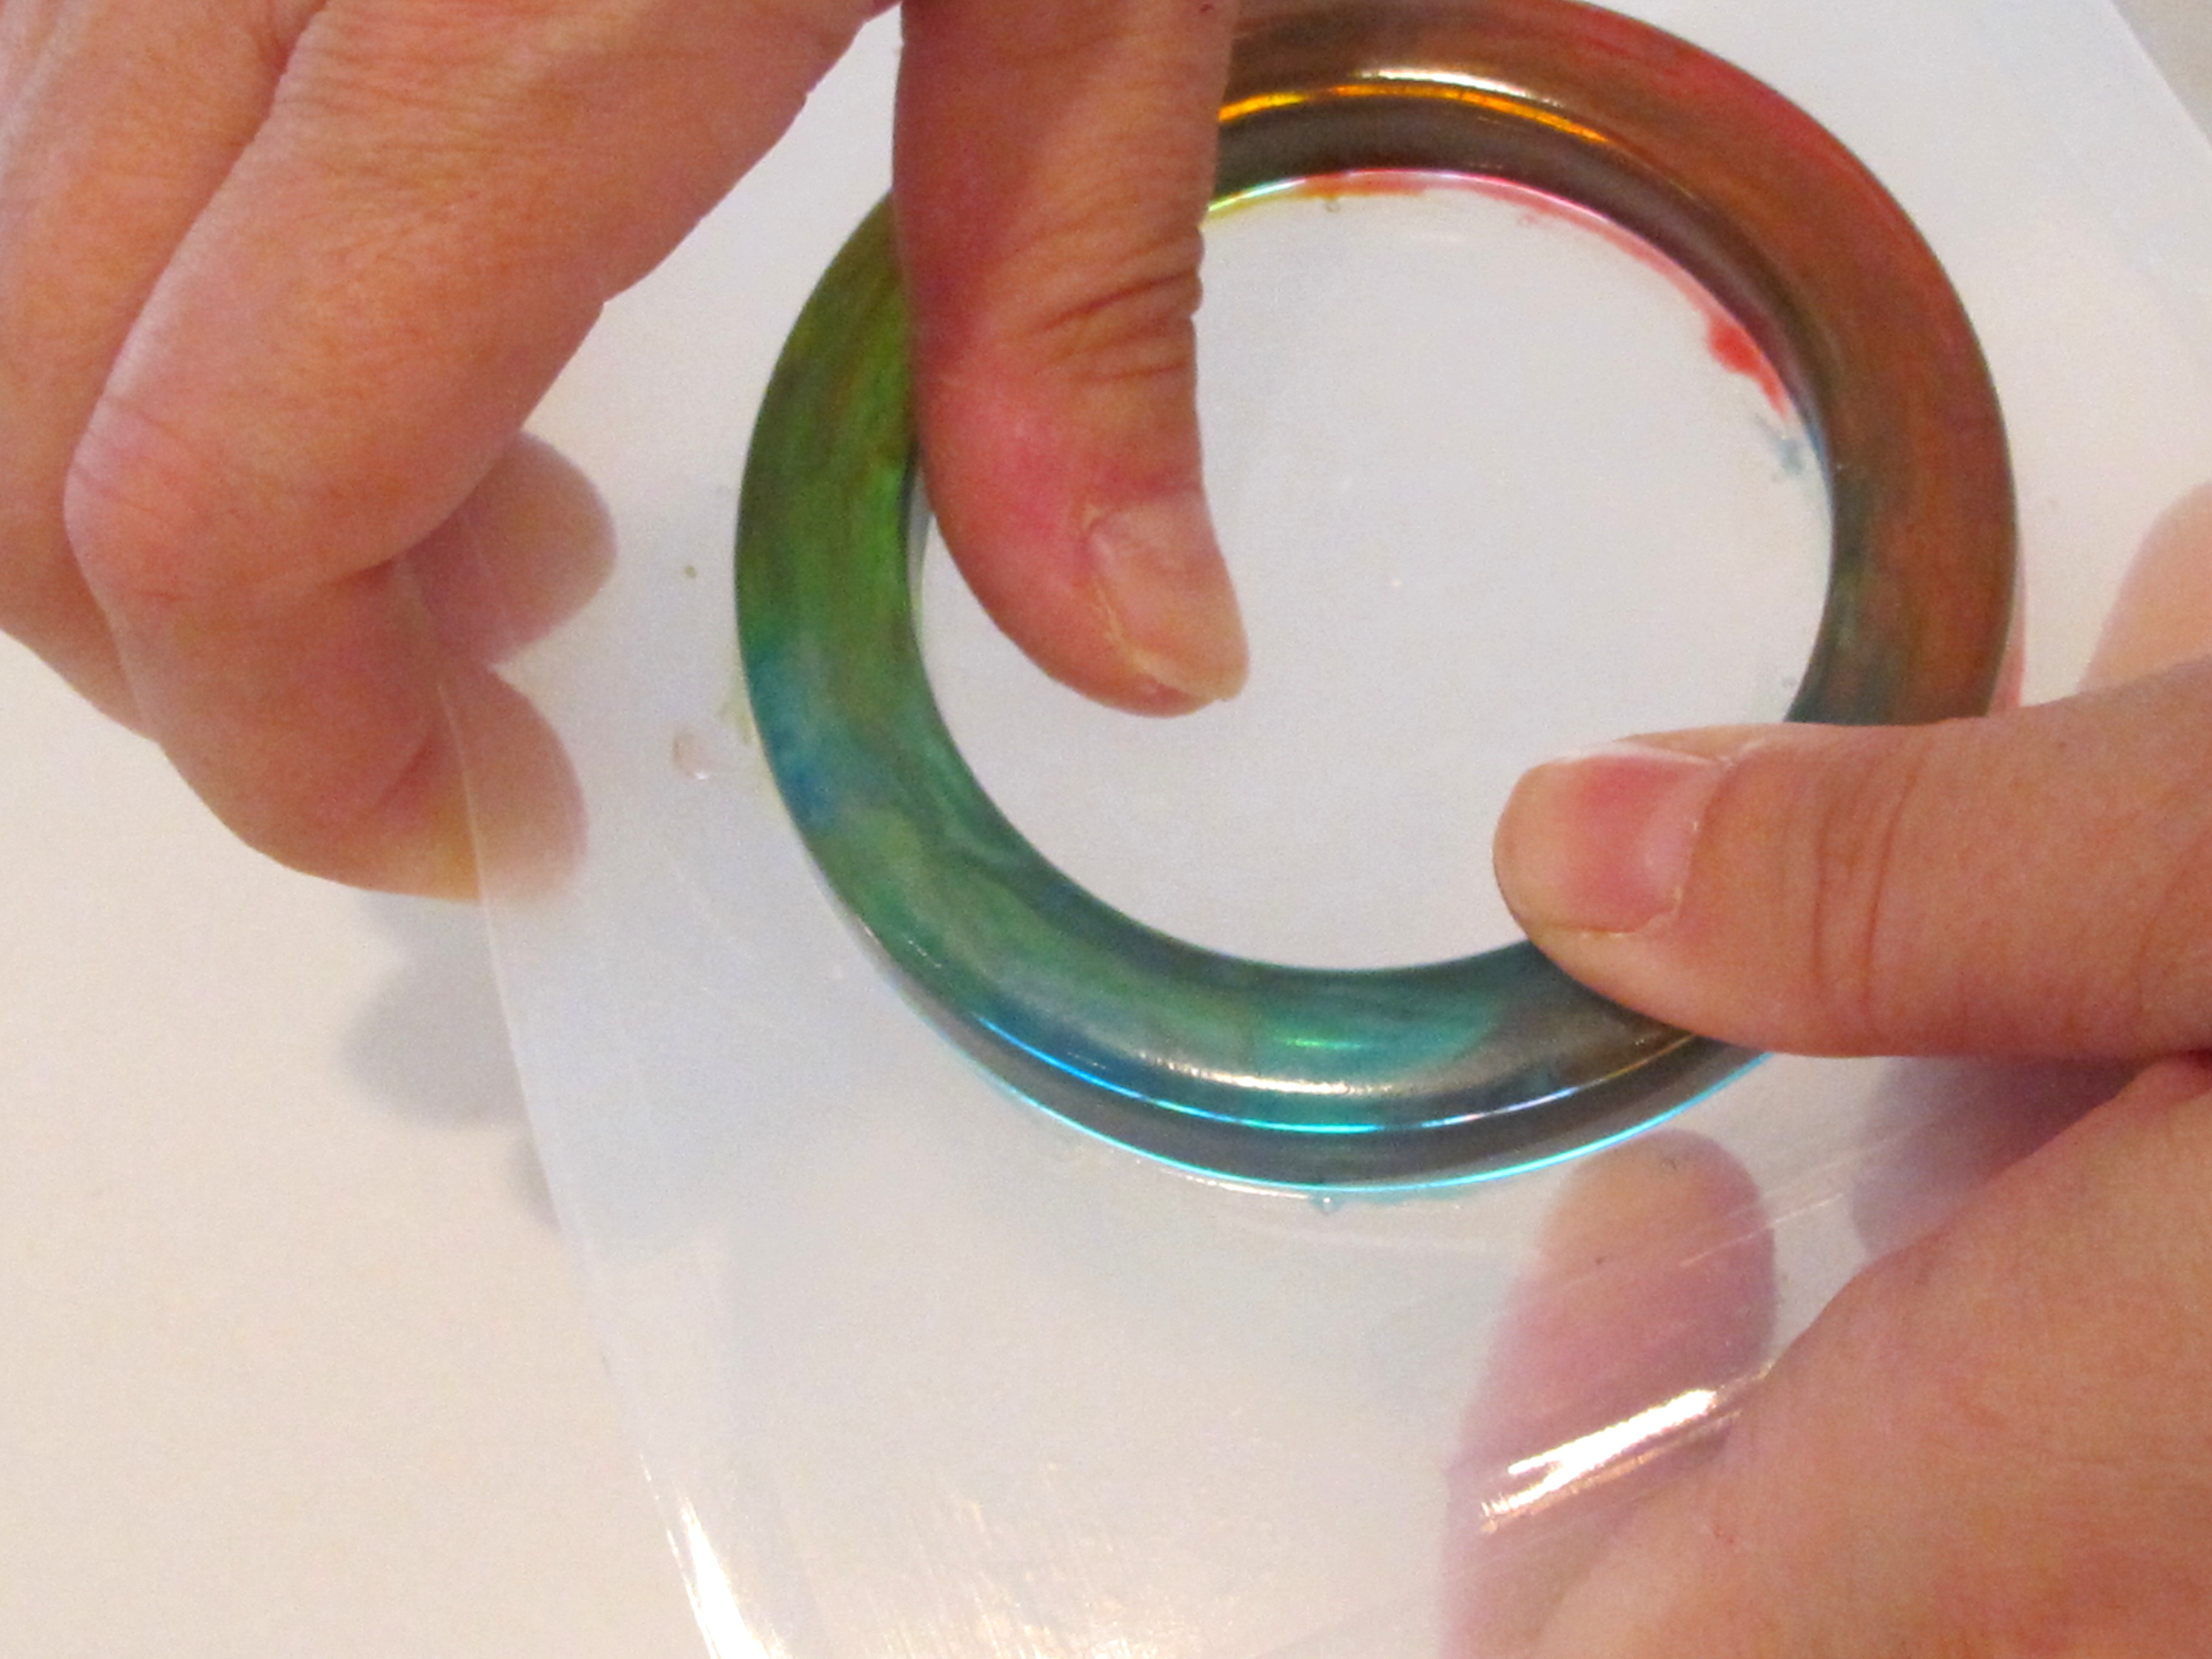 demolding a resin bracelet from a plastic mold